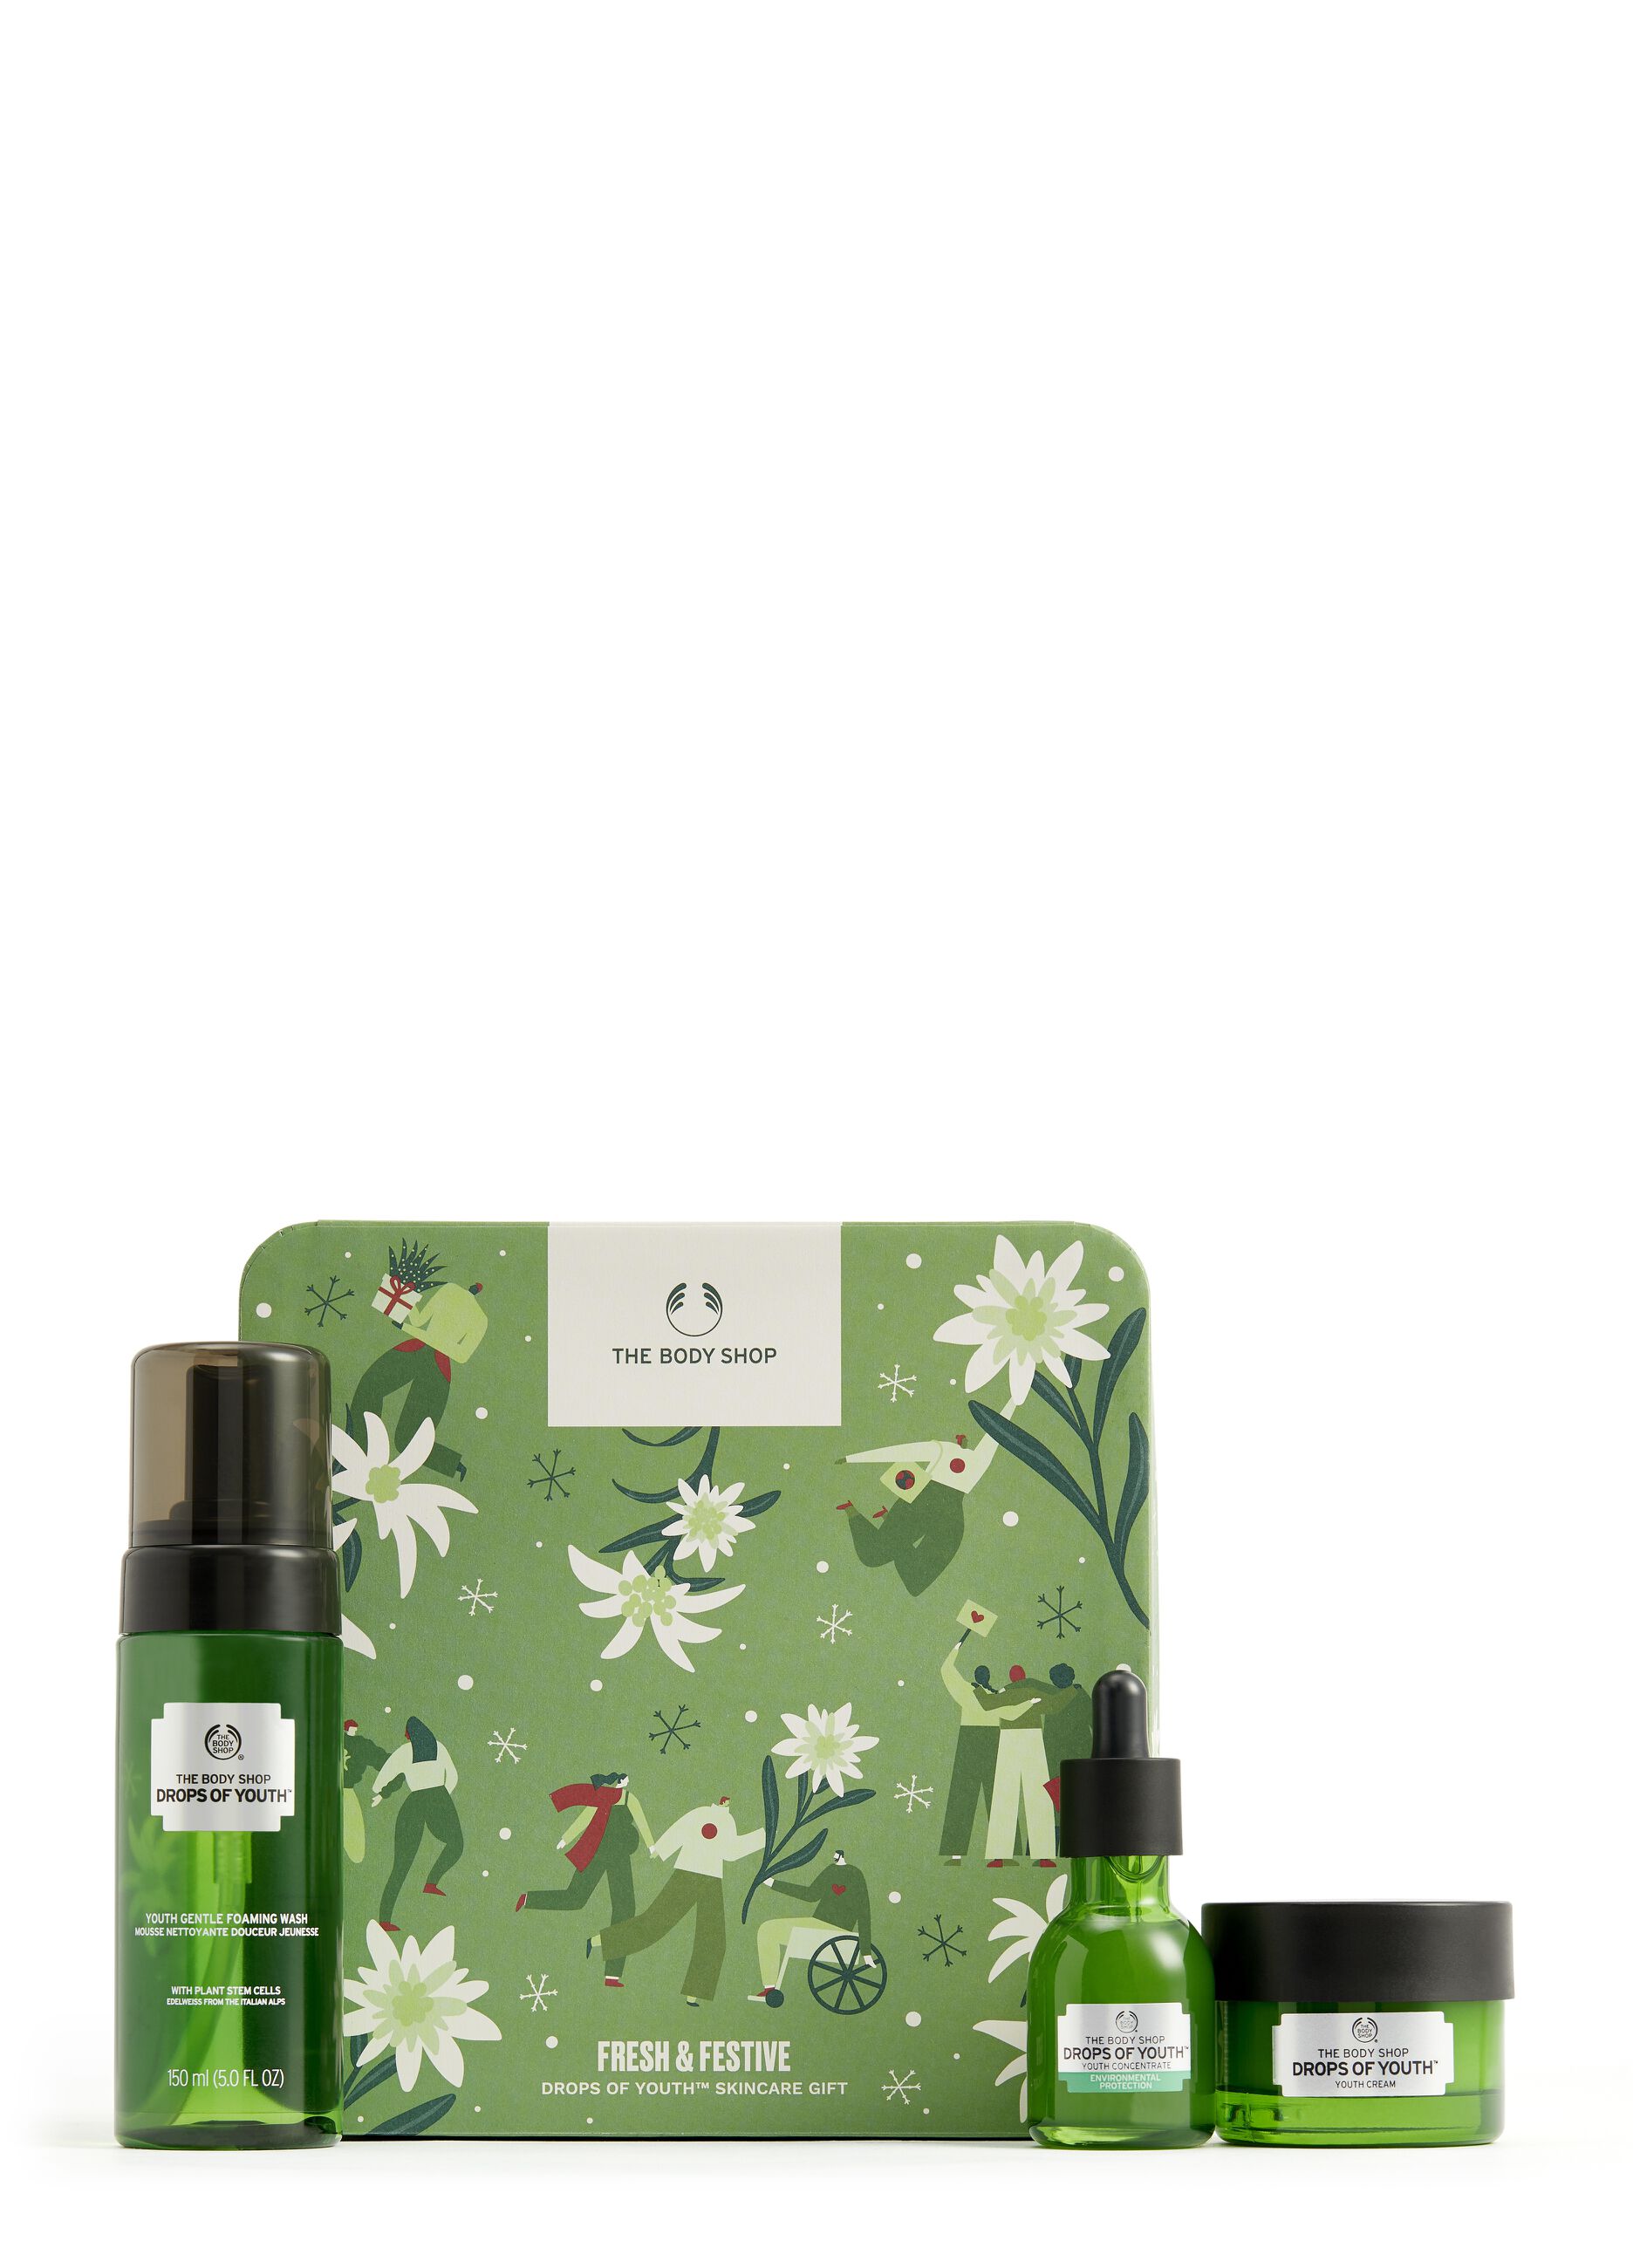 The Body Shop Drops Of Youth™ treatment gift box